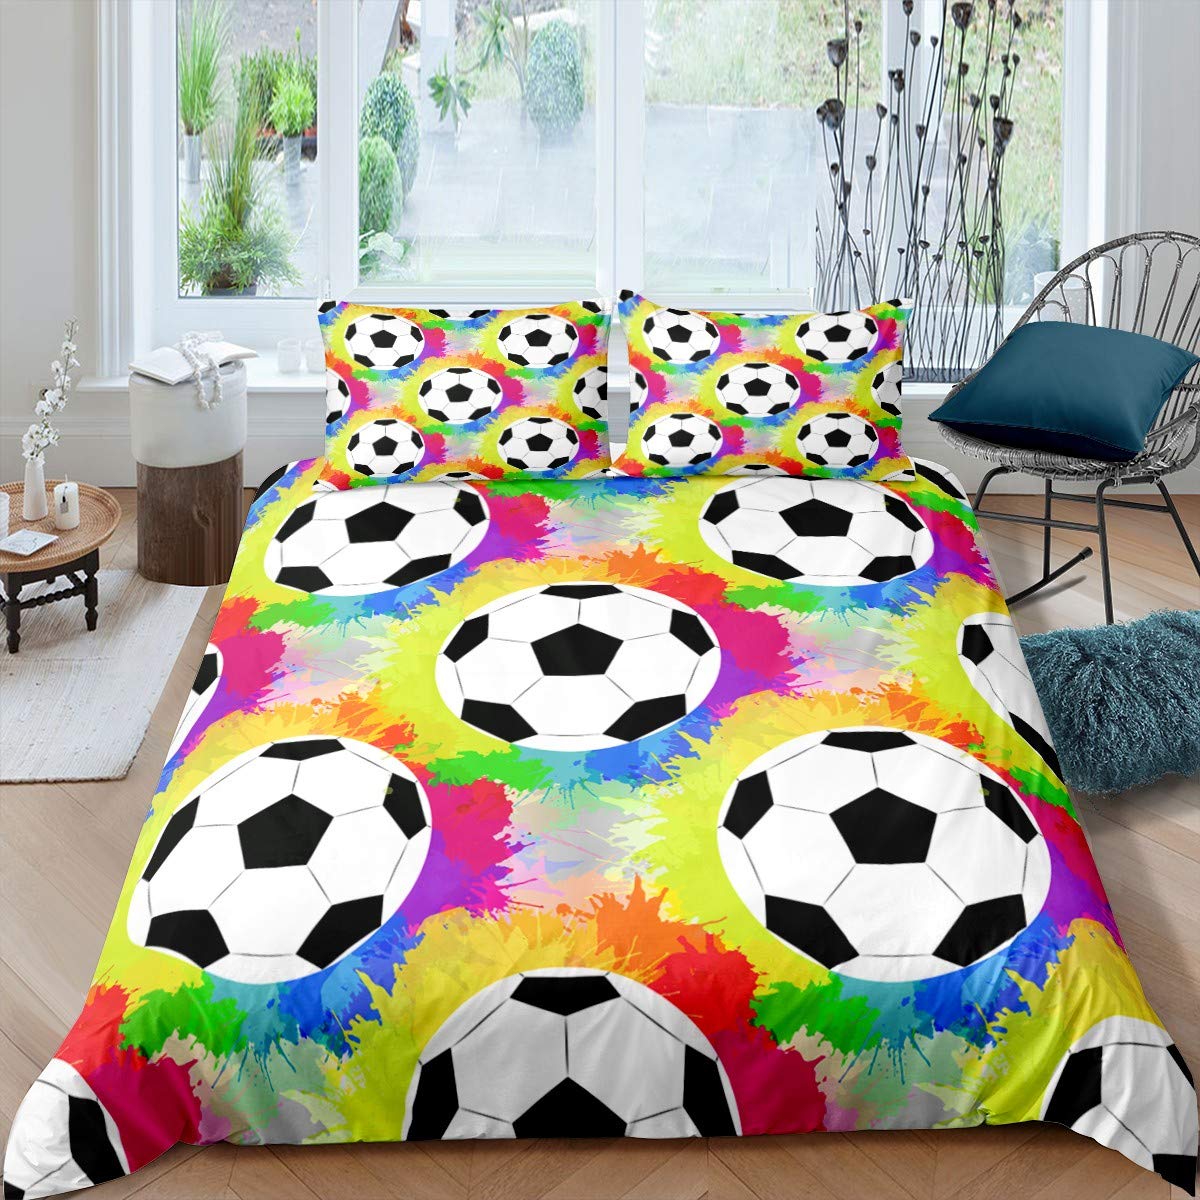 Football Duvet Cover Set Soccer Ball Pattern Sports Theme Bedding Set Microfiber Colorful Grunge Style Double King Quilt Cover